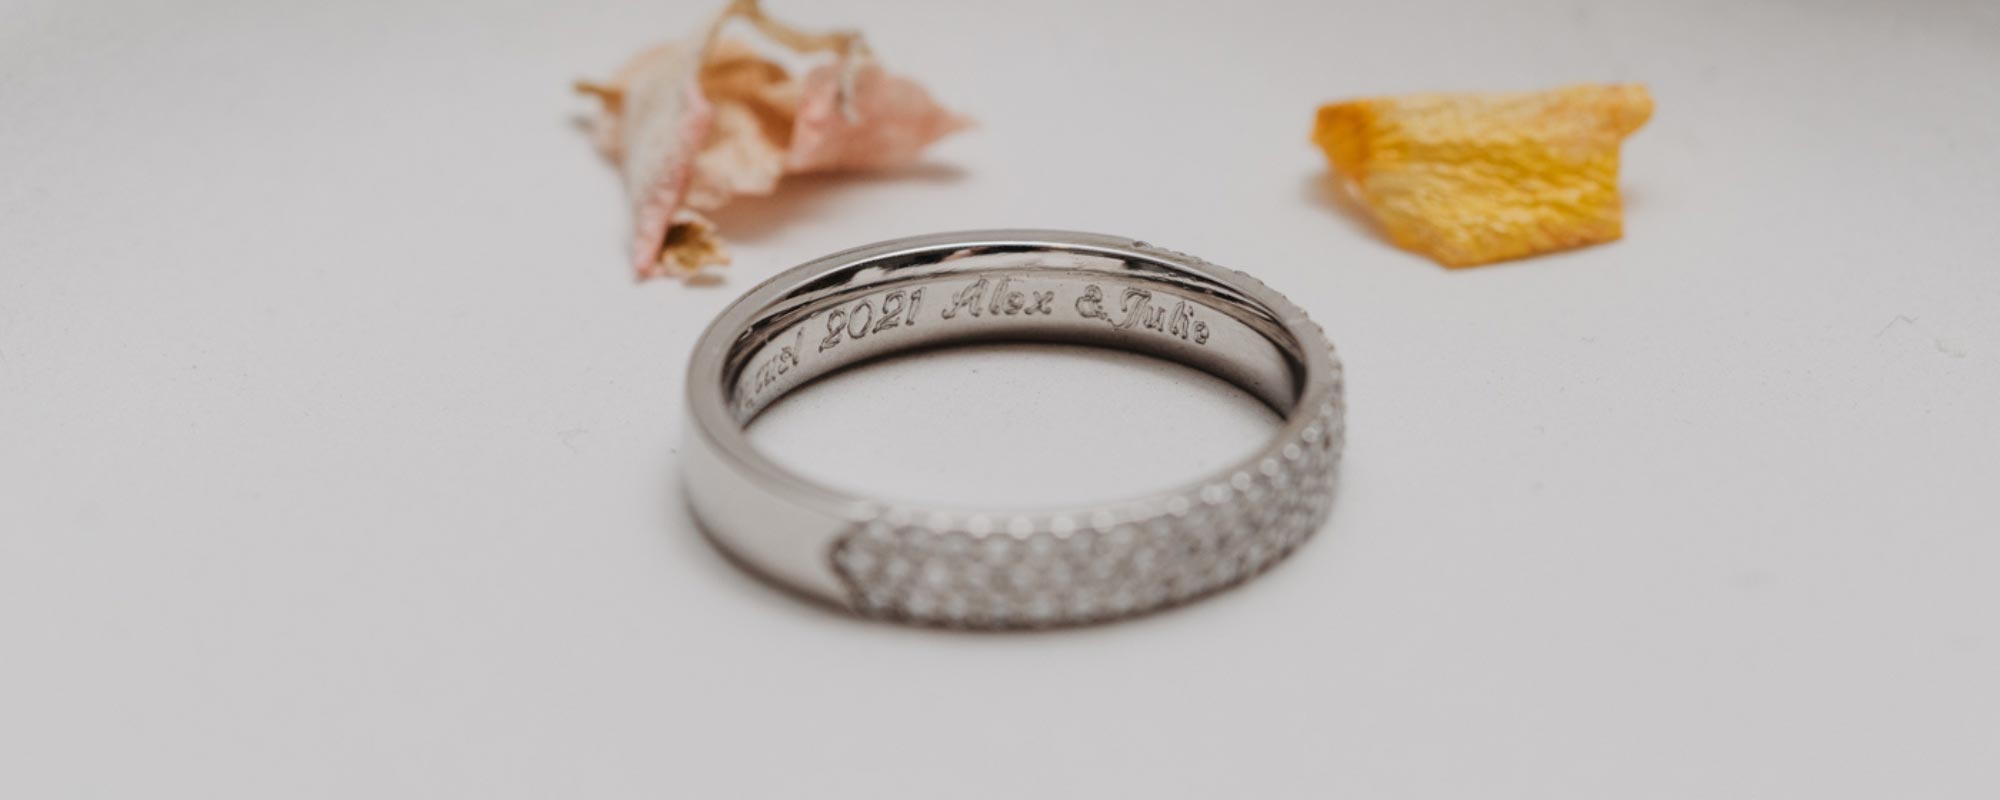 Words that Bind: Unique Engraving Ideas for Your Wedding Bands - eClarity |  Diamonds and Gemstone Engagement Rings, Bespoke Wedding Bands and Bridal  Jewellery